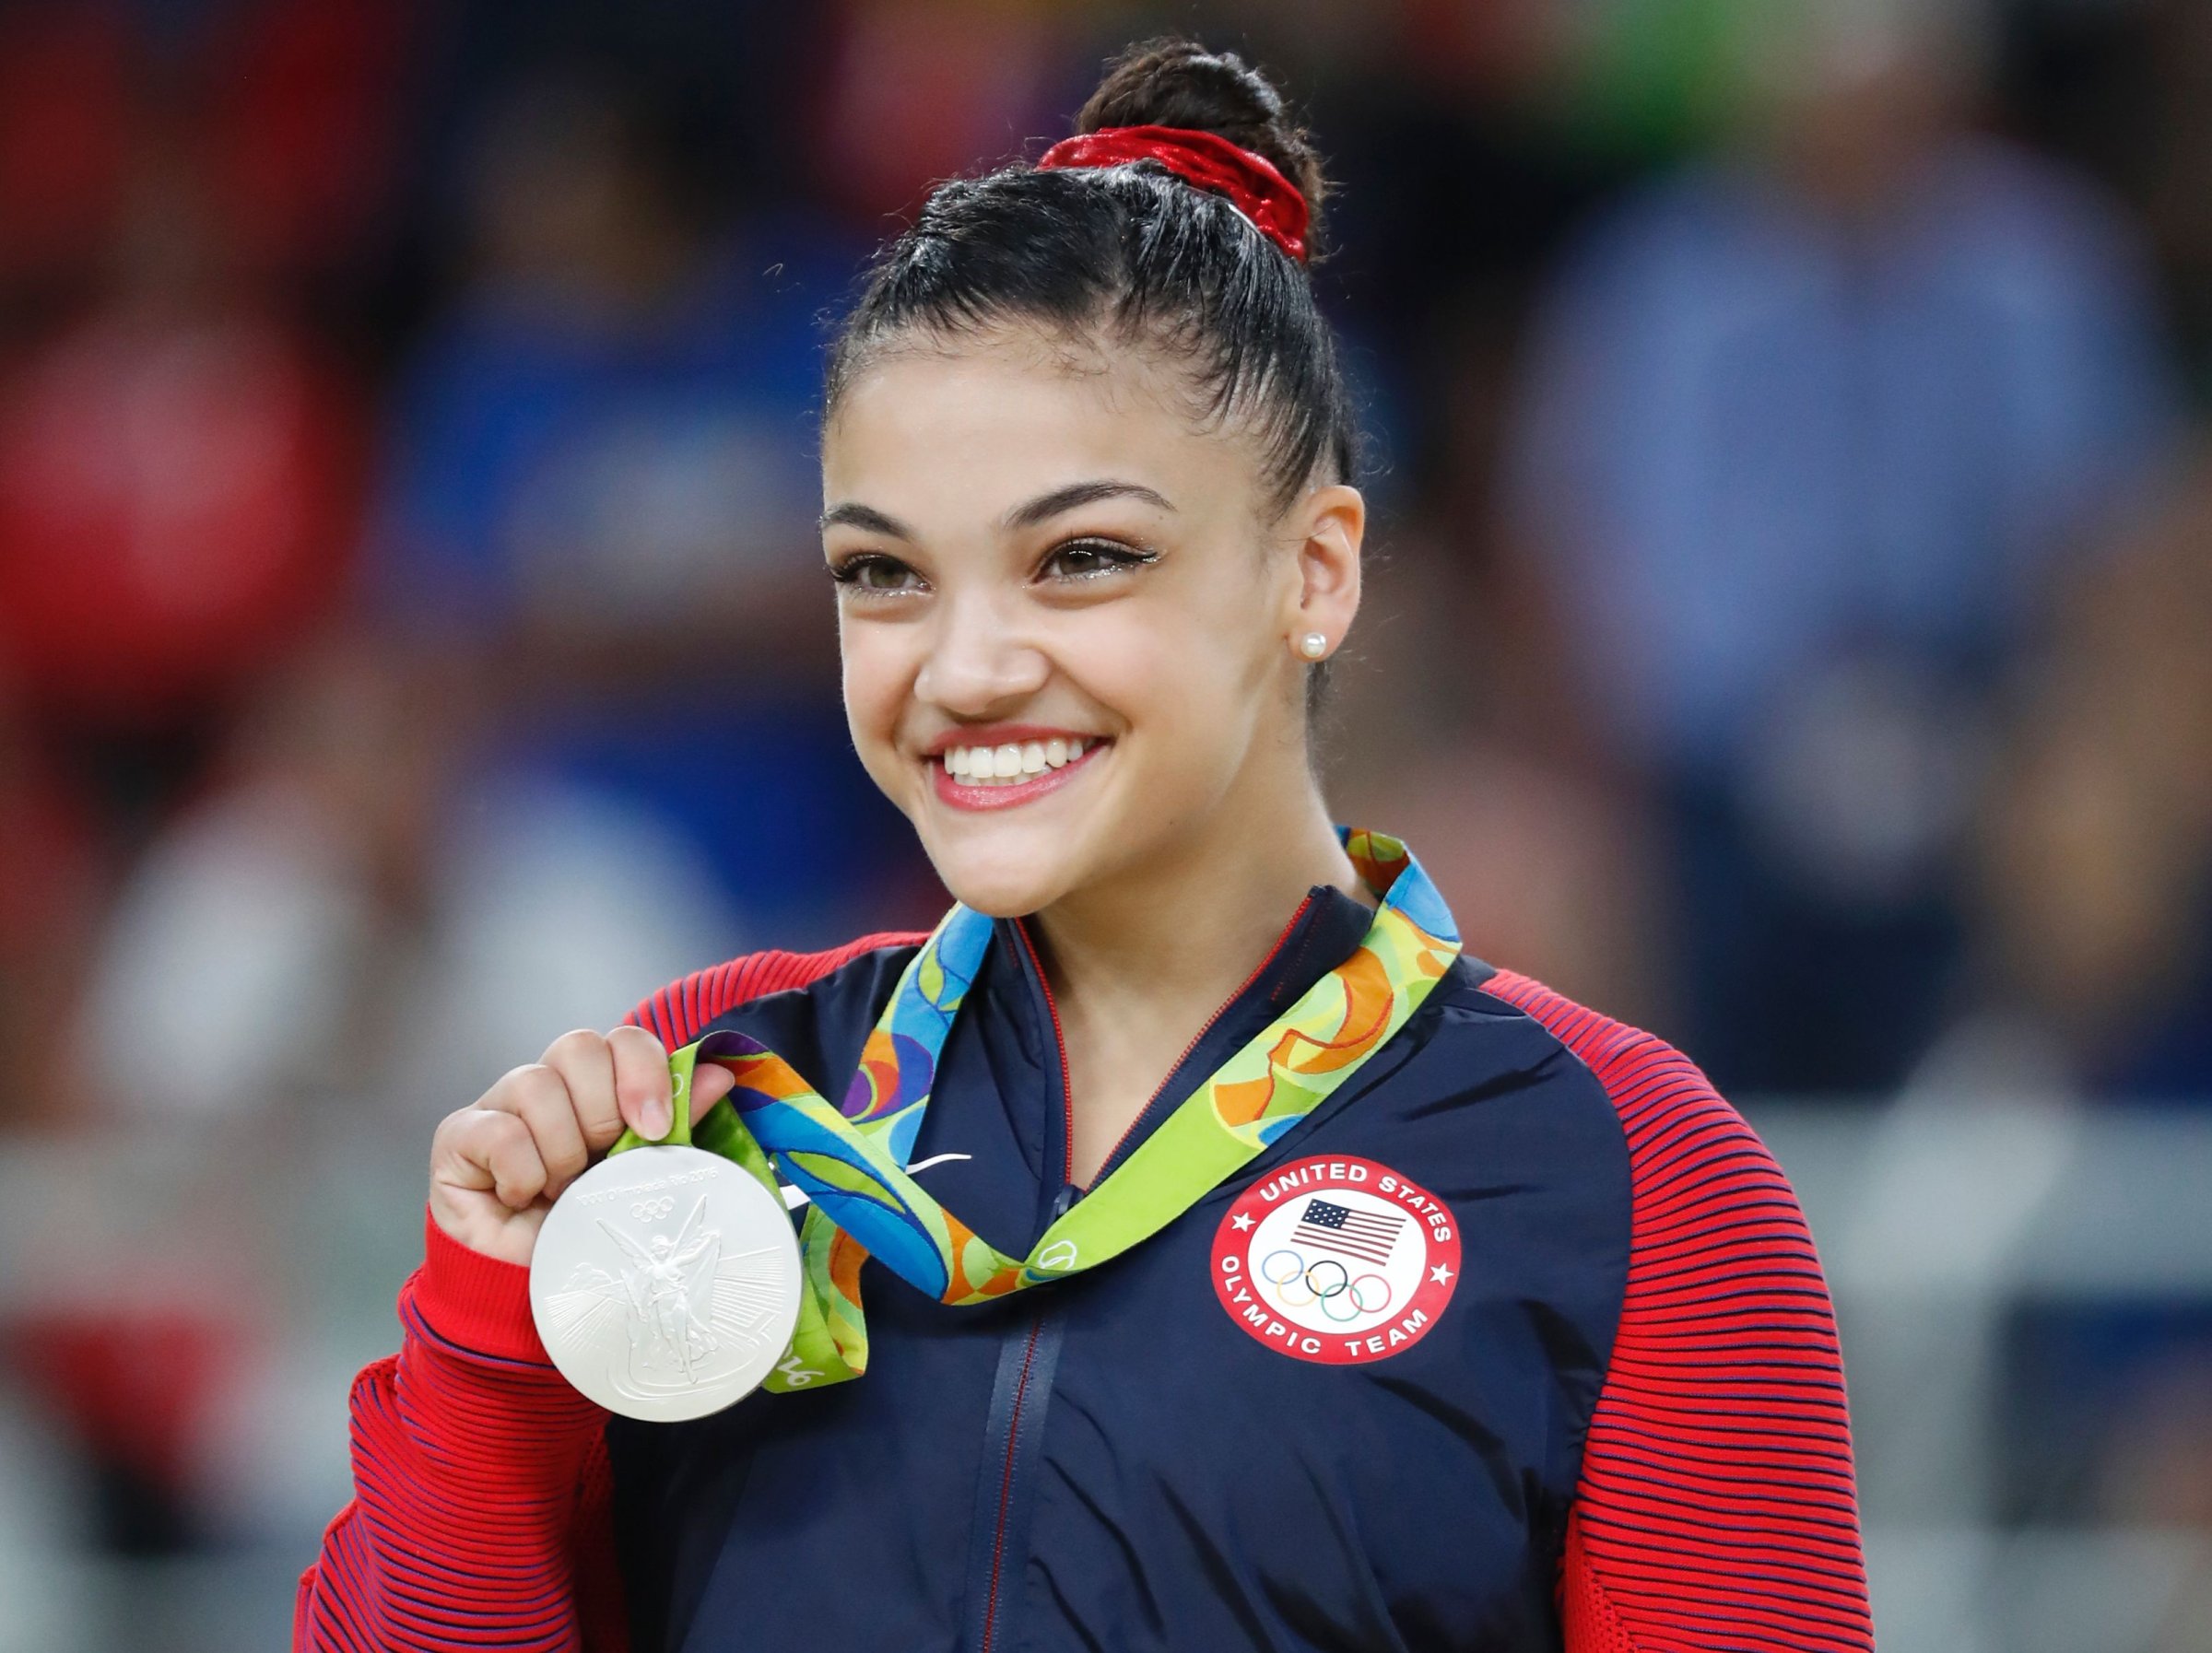 Silver medallist US gymnast Lauren Hernandez celebrates on the podium of the women's balance beam event final of the Artistic Gymnastics at the Olympic Arena during the Rio 2016 Olympic Games in Rio de Janeiro on August 15, 2016.